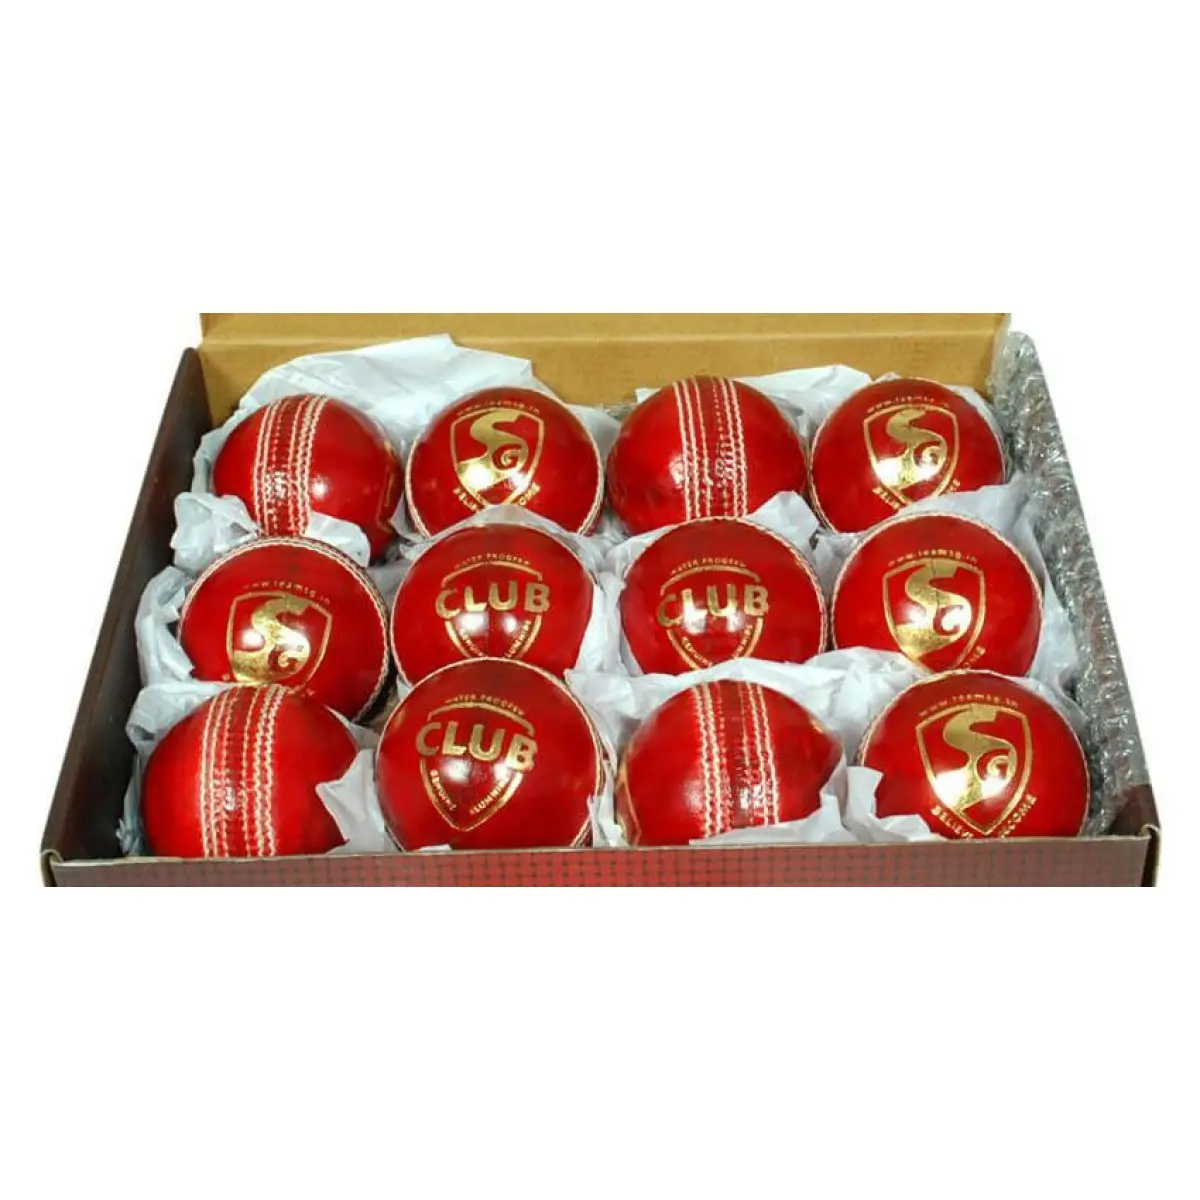 Details about   SG Club Cricket Ball Leather High Quality Four-Piece Cricket Ball Free Shipping 